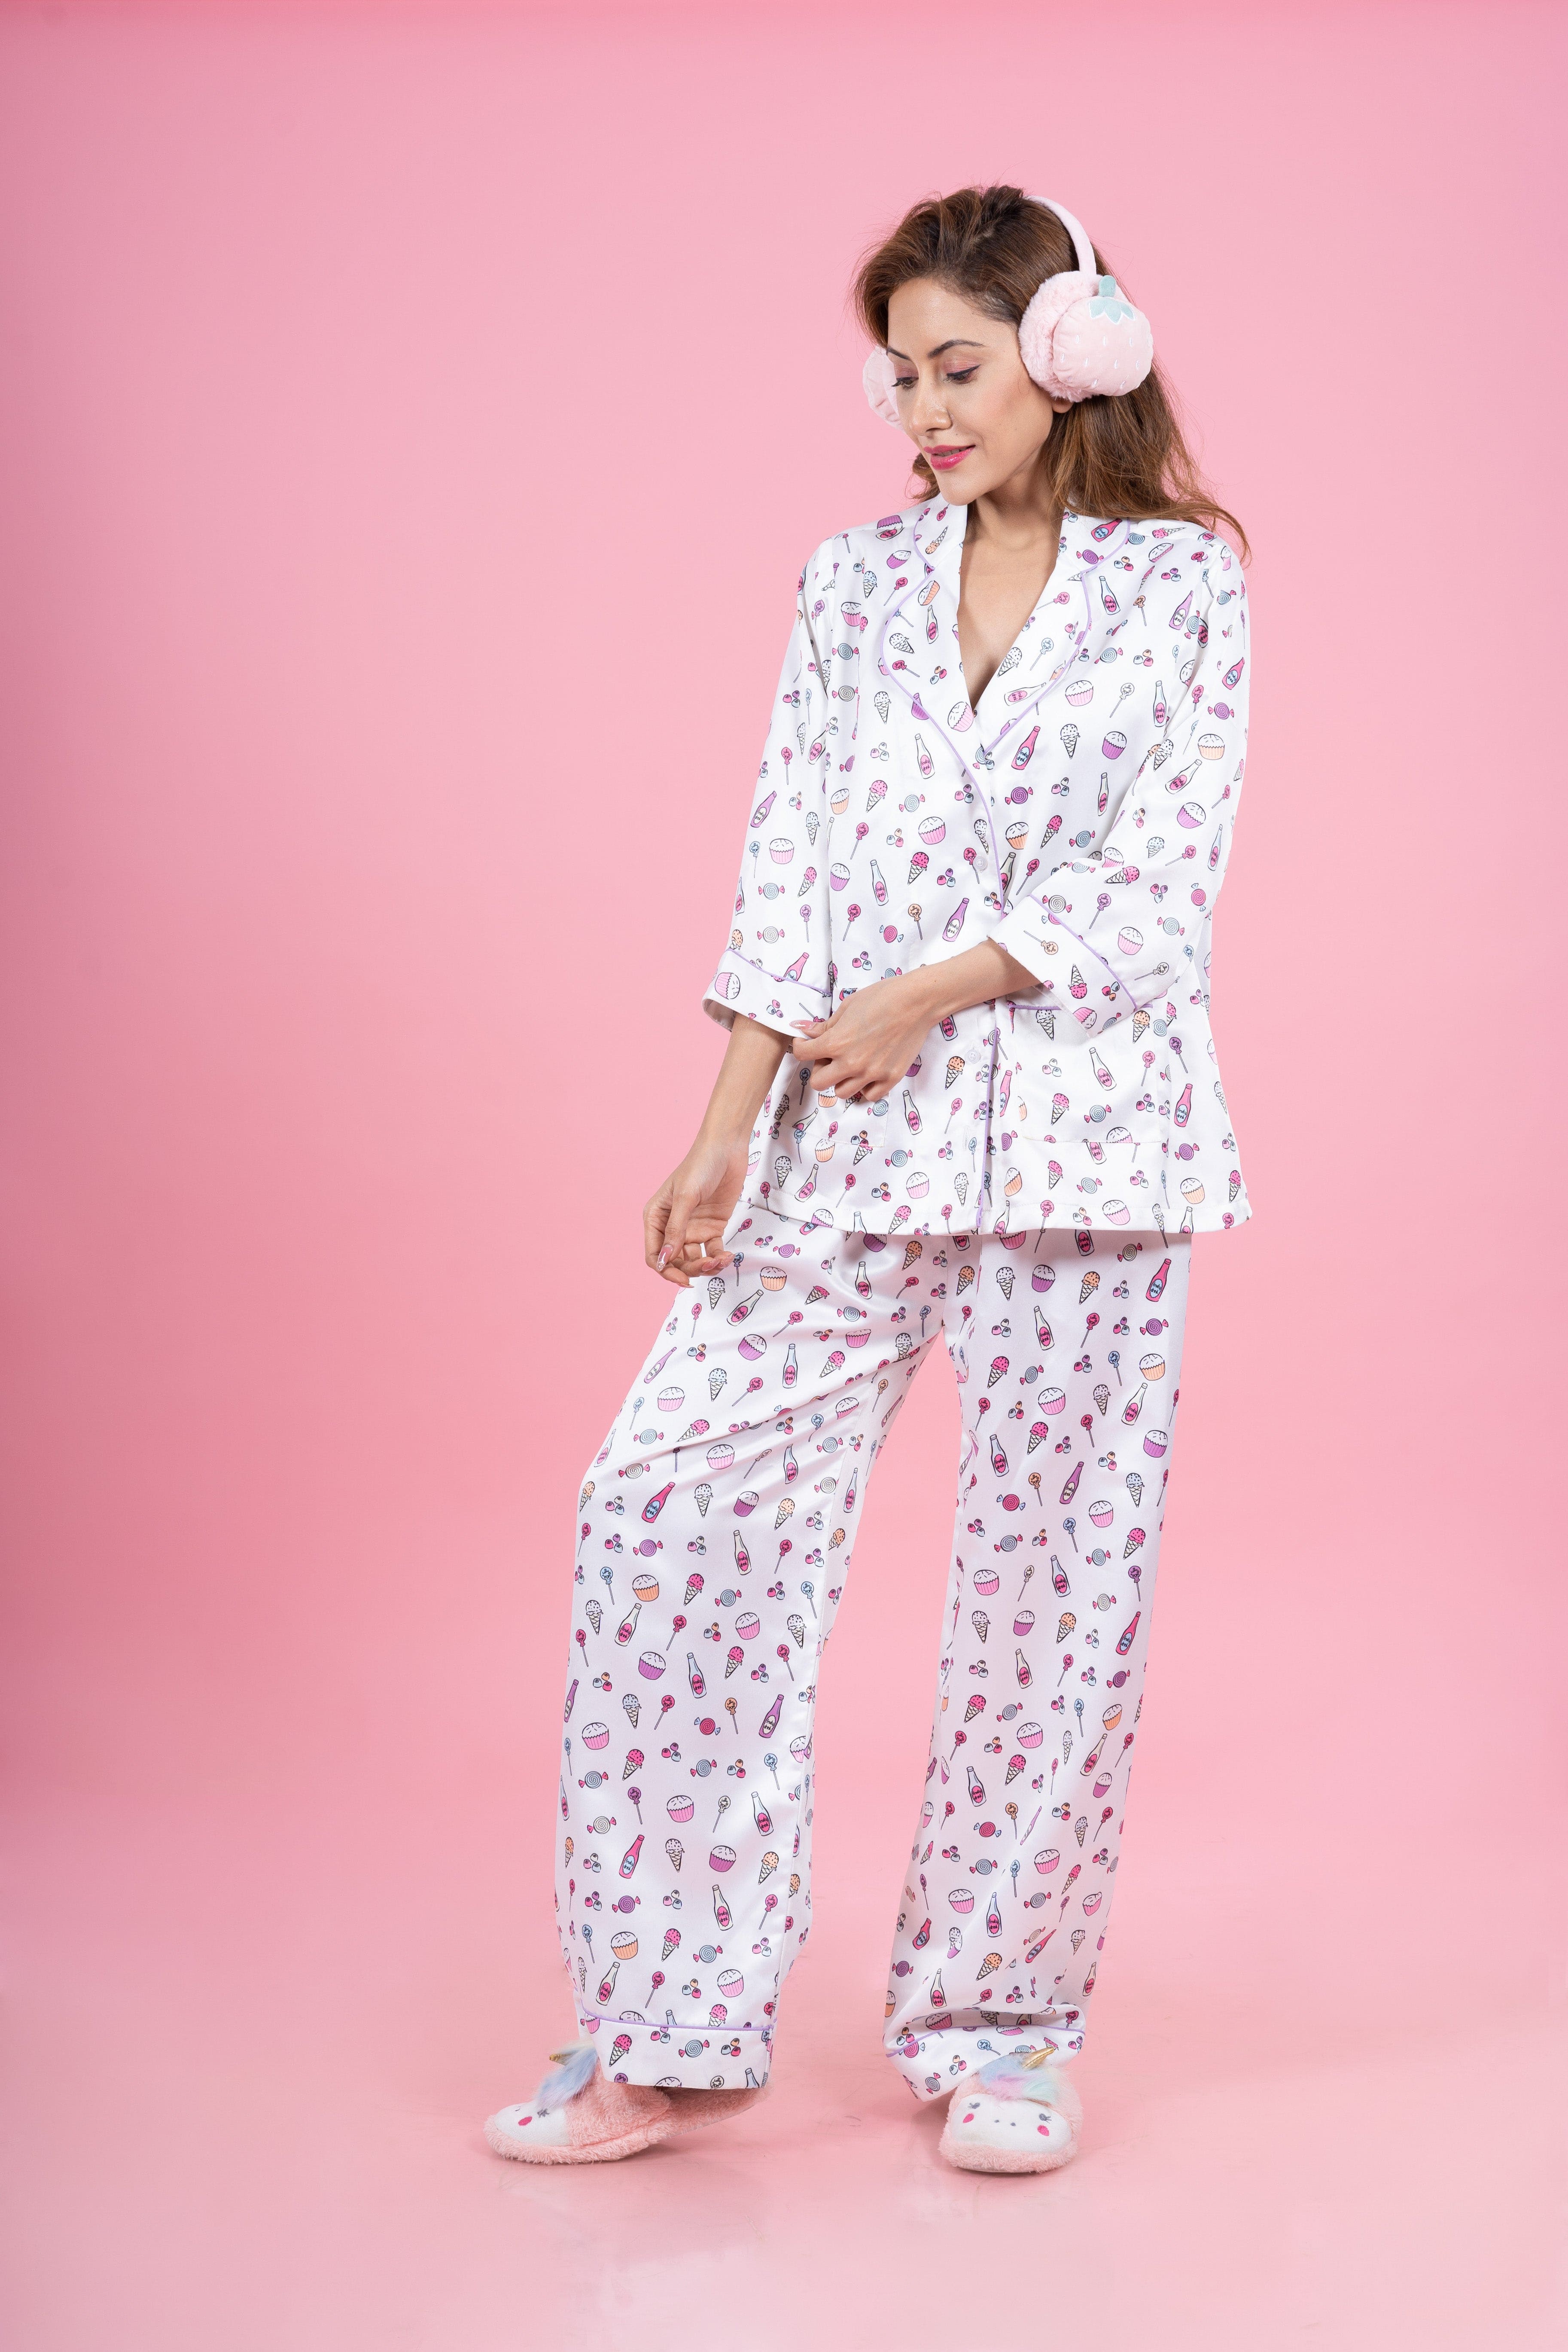 Candy printed nightsuit